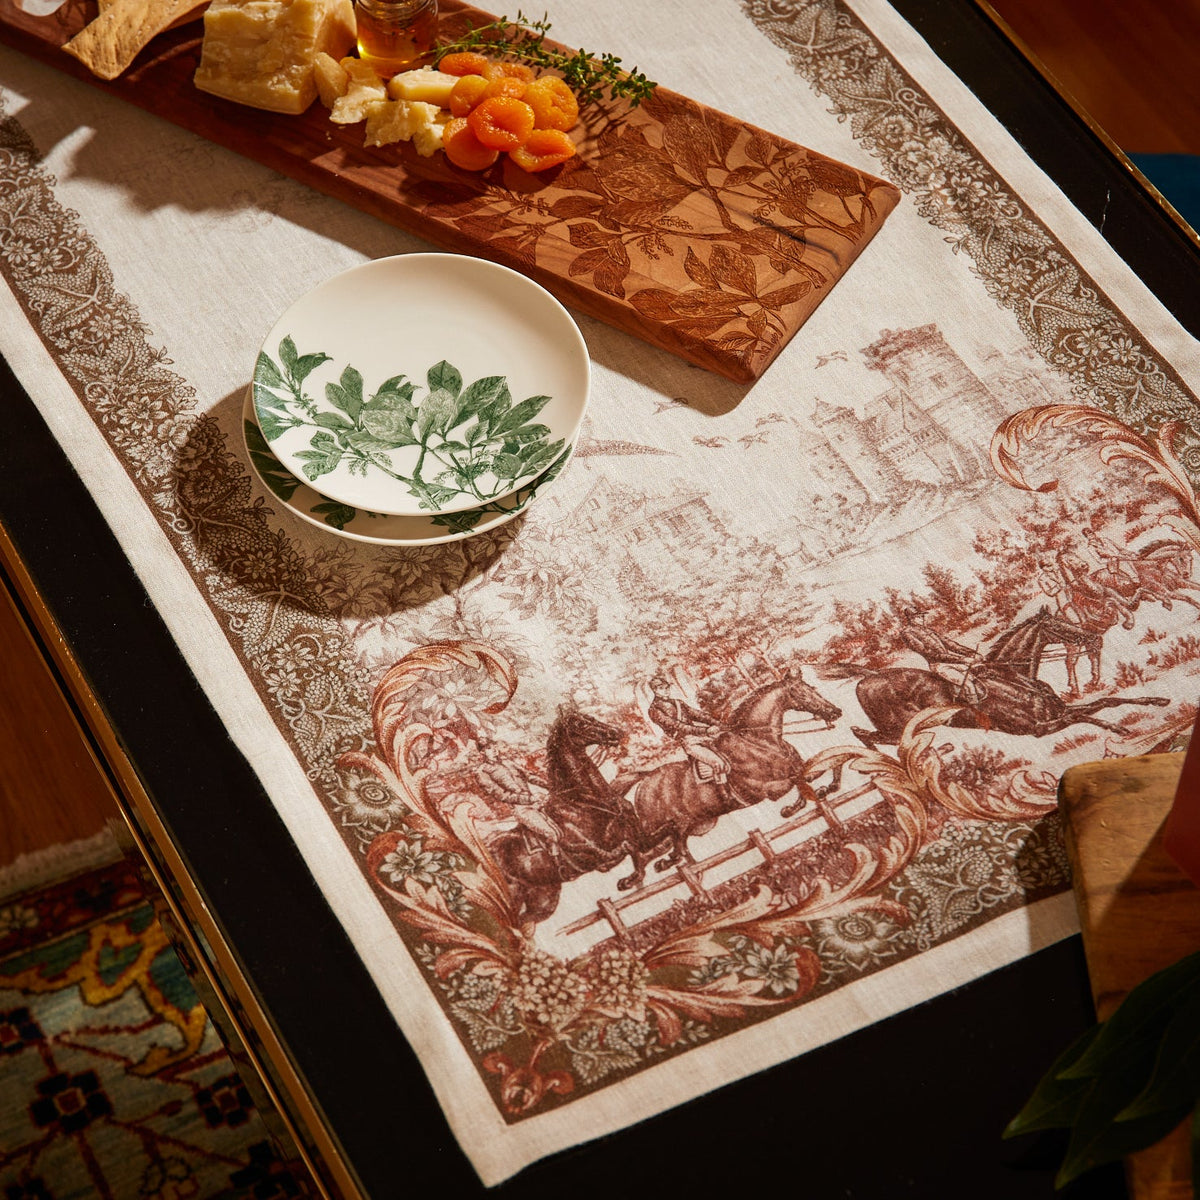 A table is set with a vintage tablecloth featuring horse and carriage designs, a wooden cheese board with cheese and apricots, and Caskata&#39;s Arbor Green Small Plates adorned with a green leaf motif.